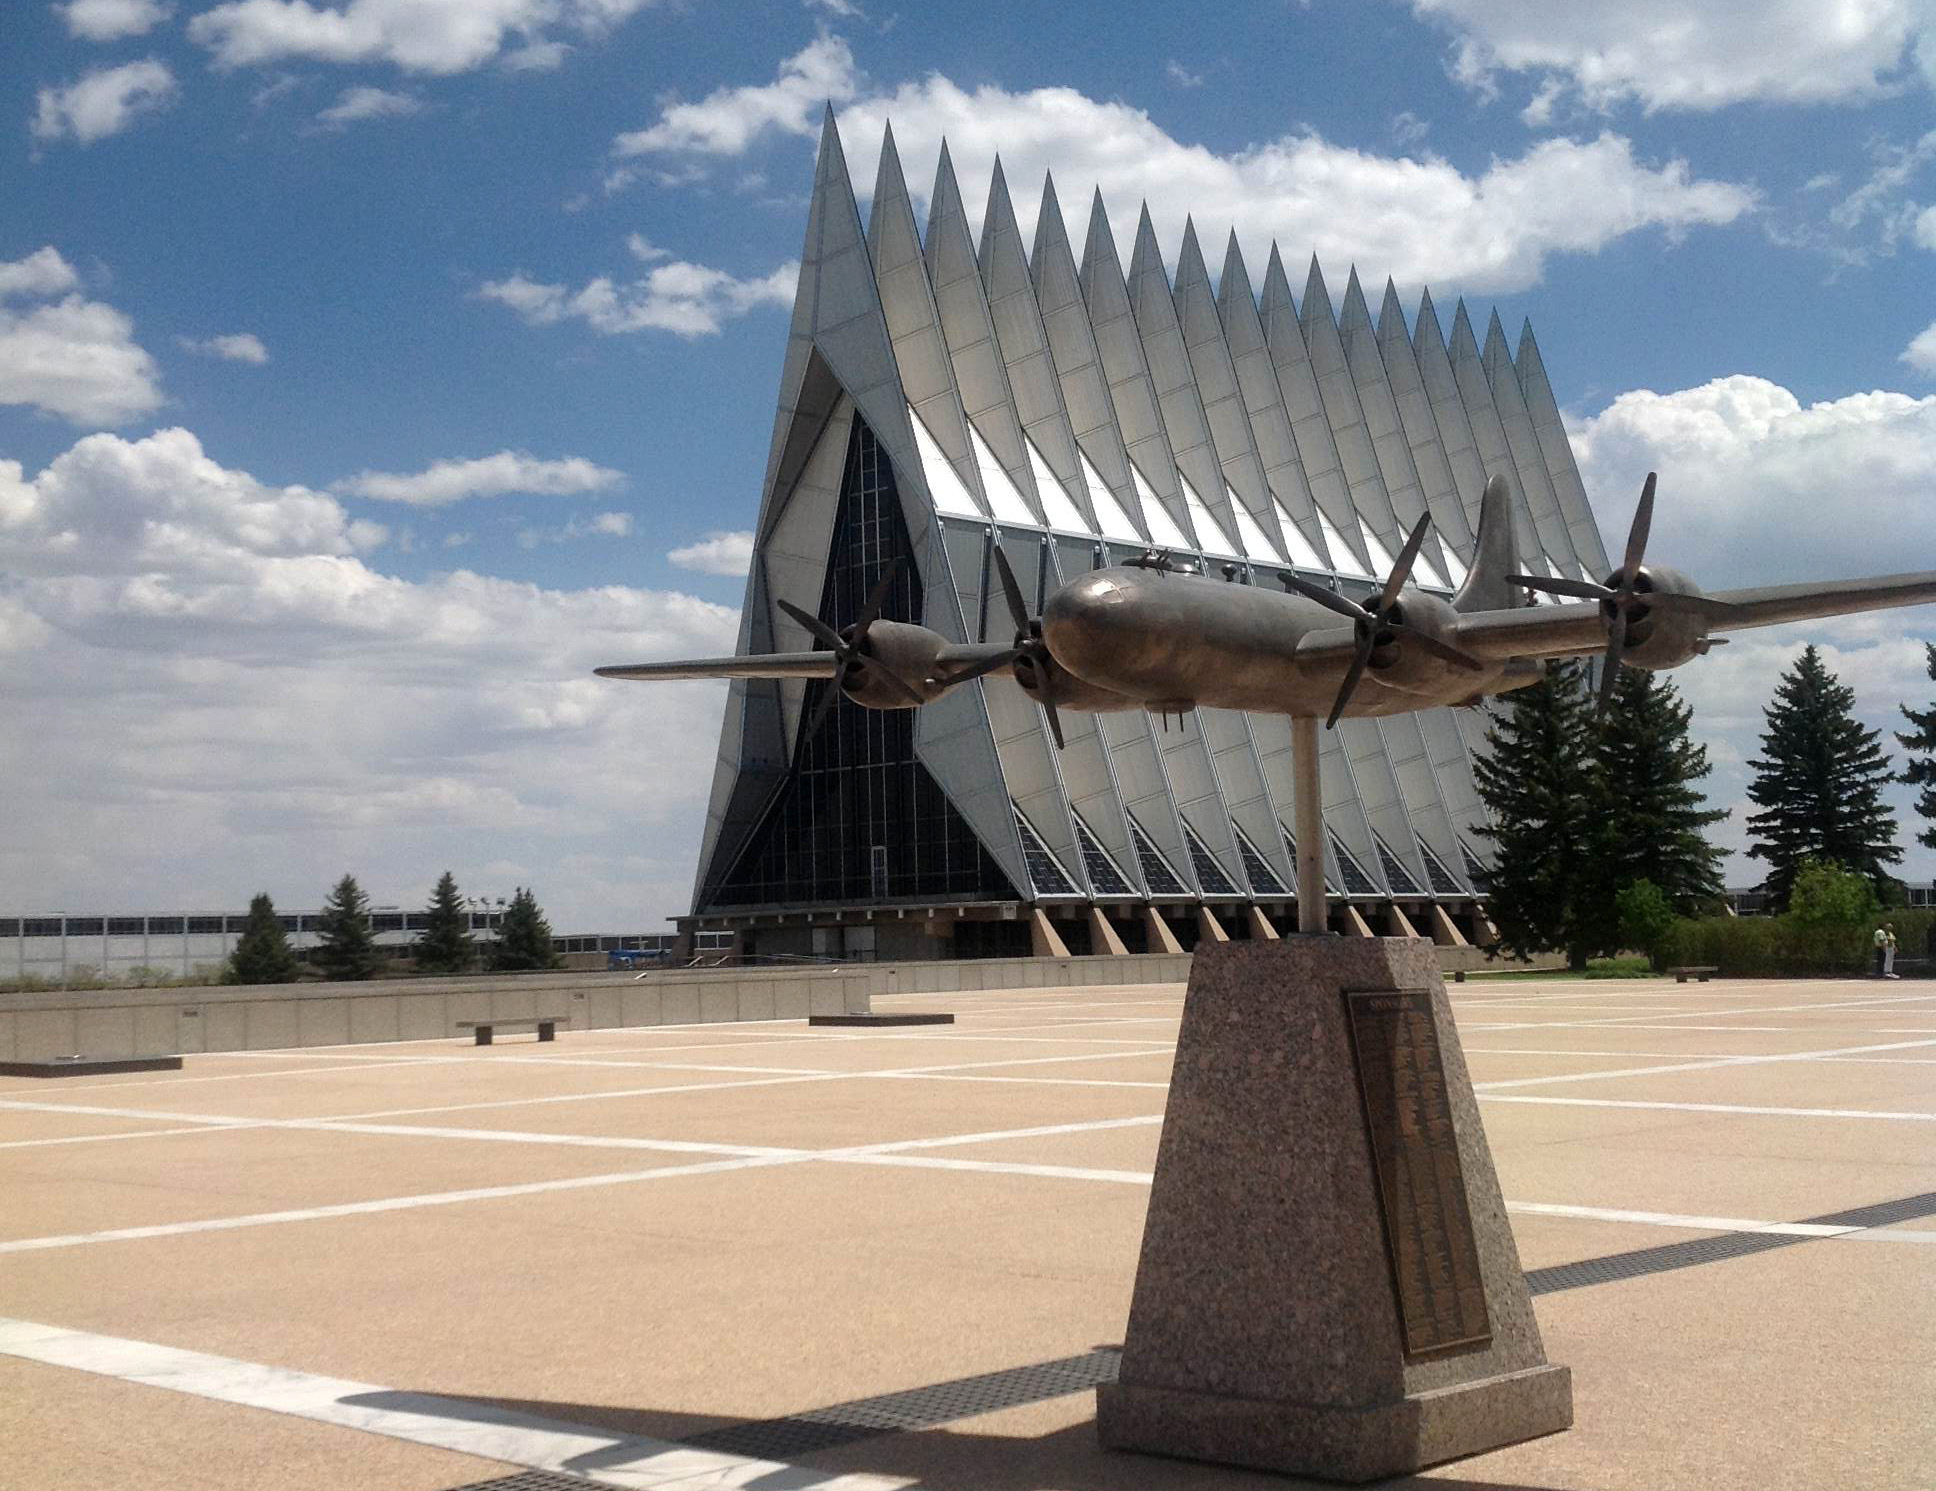 U.S. Air Force Academy Visitor Center